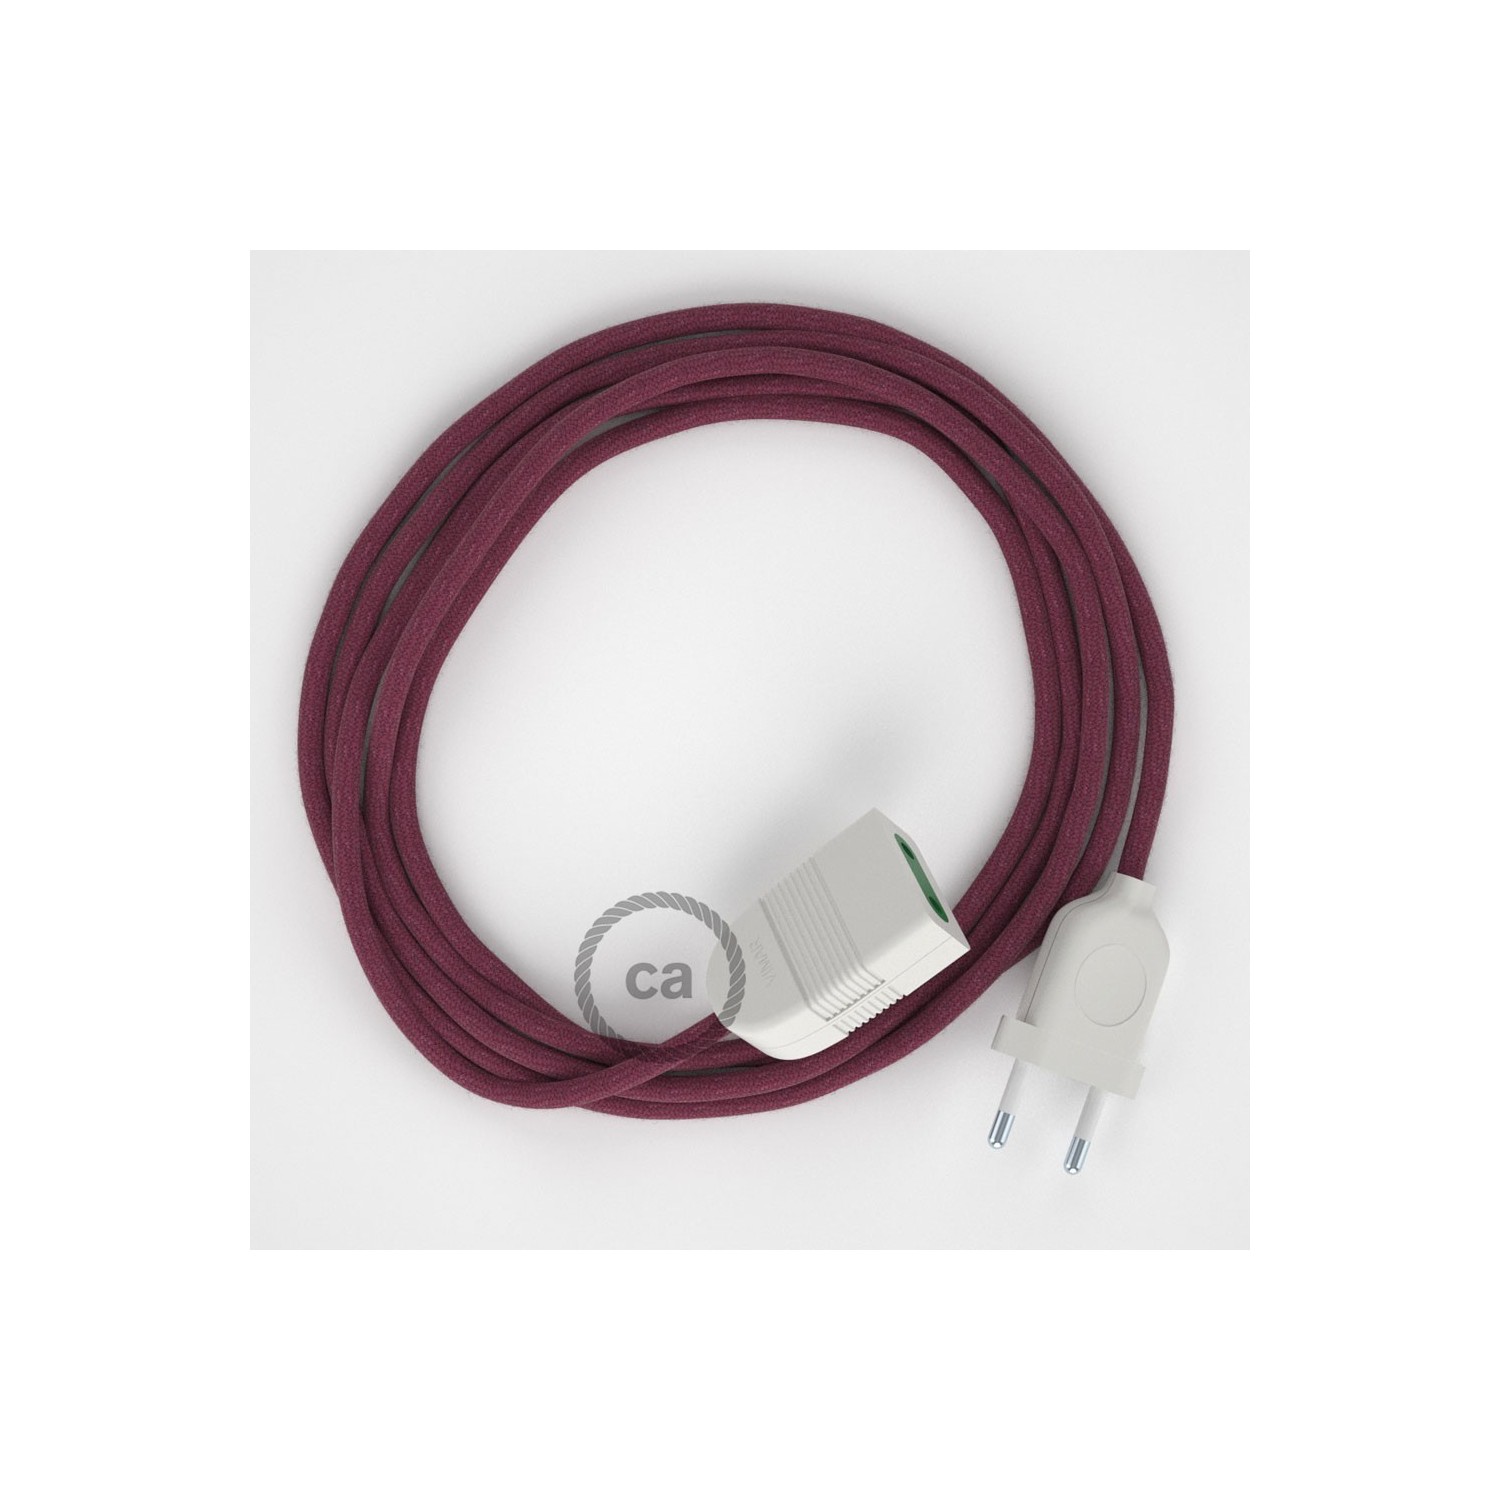 Burgundy Cotton fabric RC32 2P 10A Extension cable Made in Italy